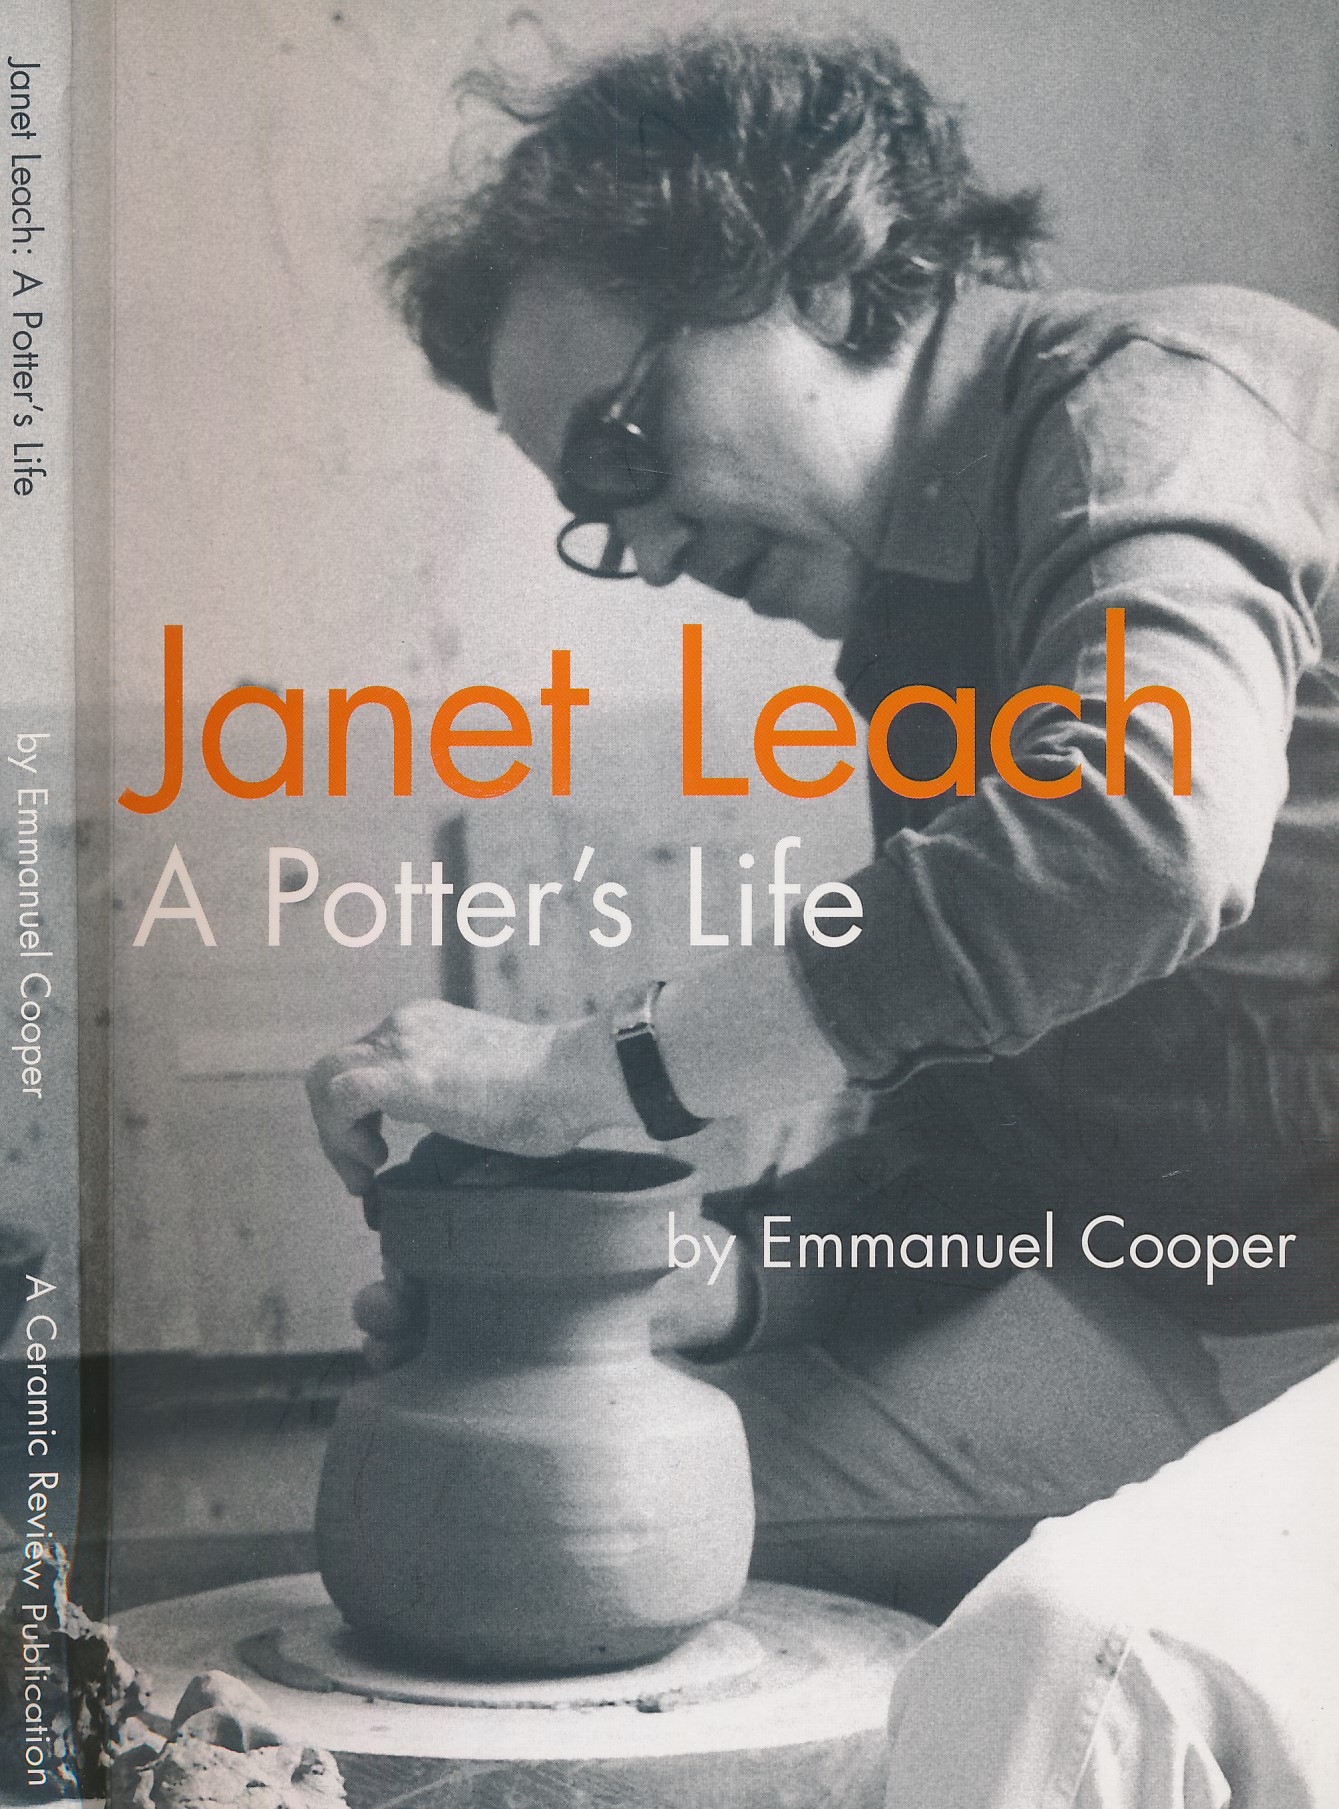 Janet Leach. A Potter's Life